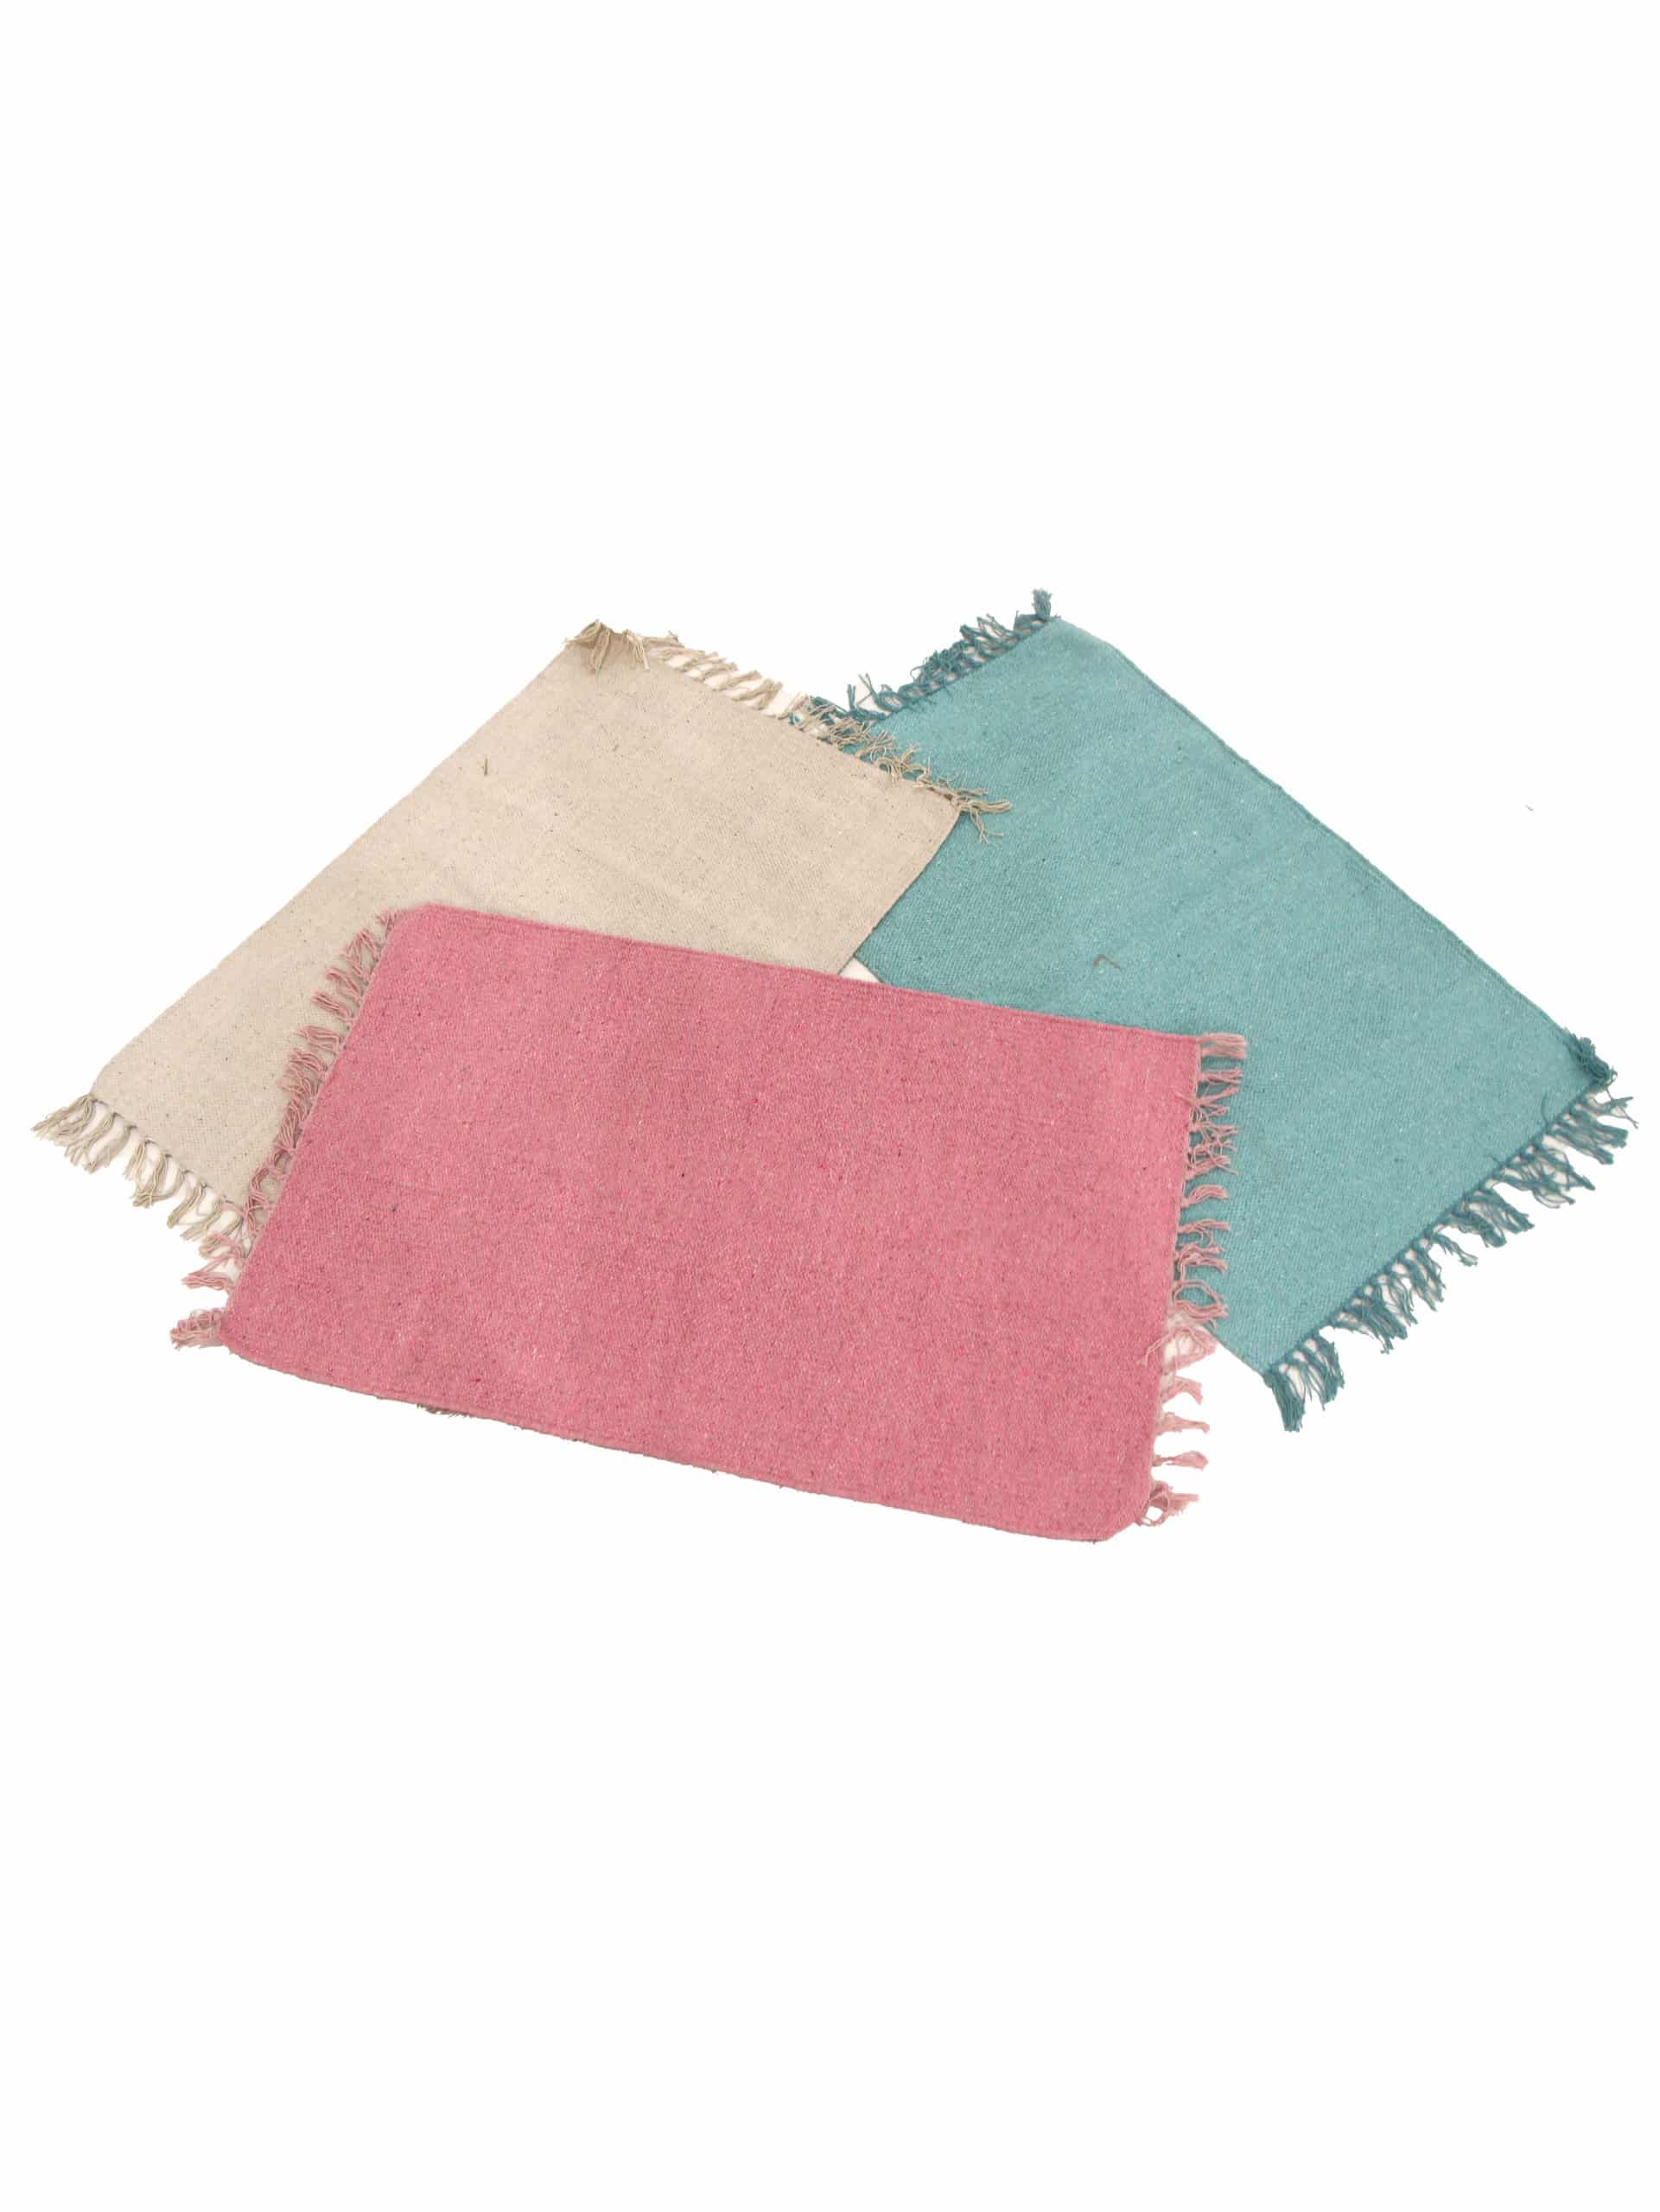 Woven Rugs - Set of 3 - Pastels